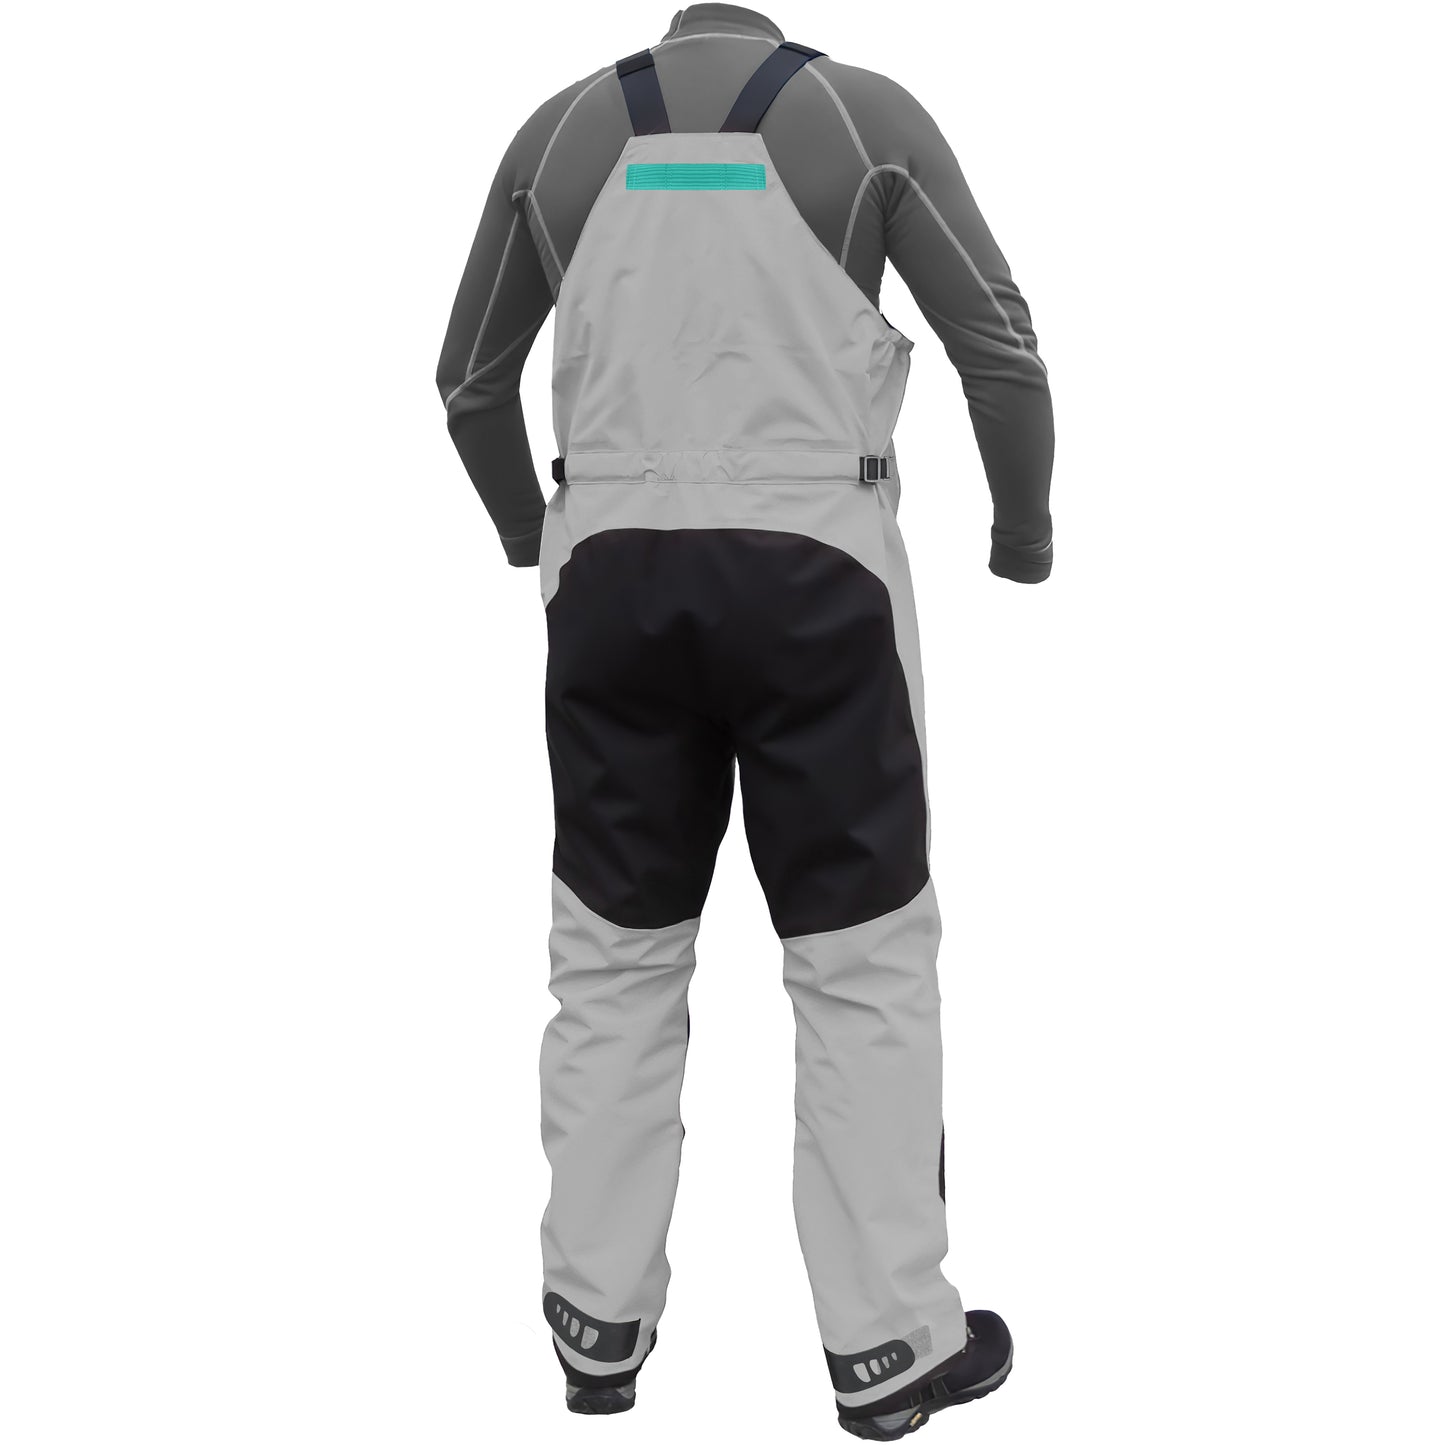 Waterproof sailing/boating pants from REwind. Back view